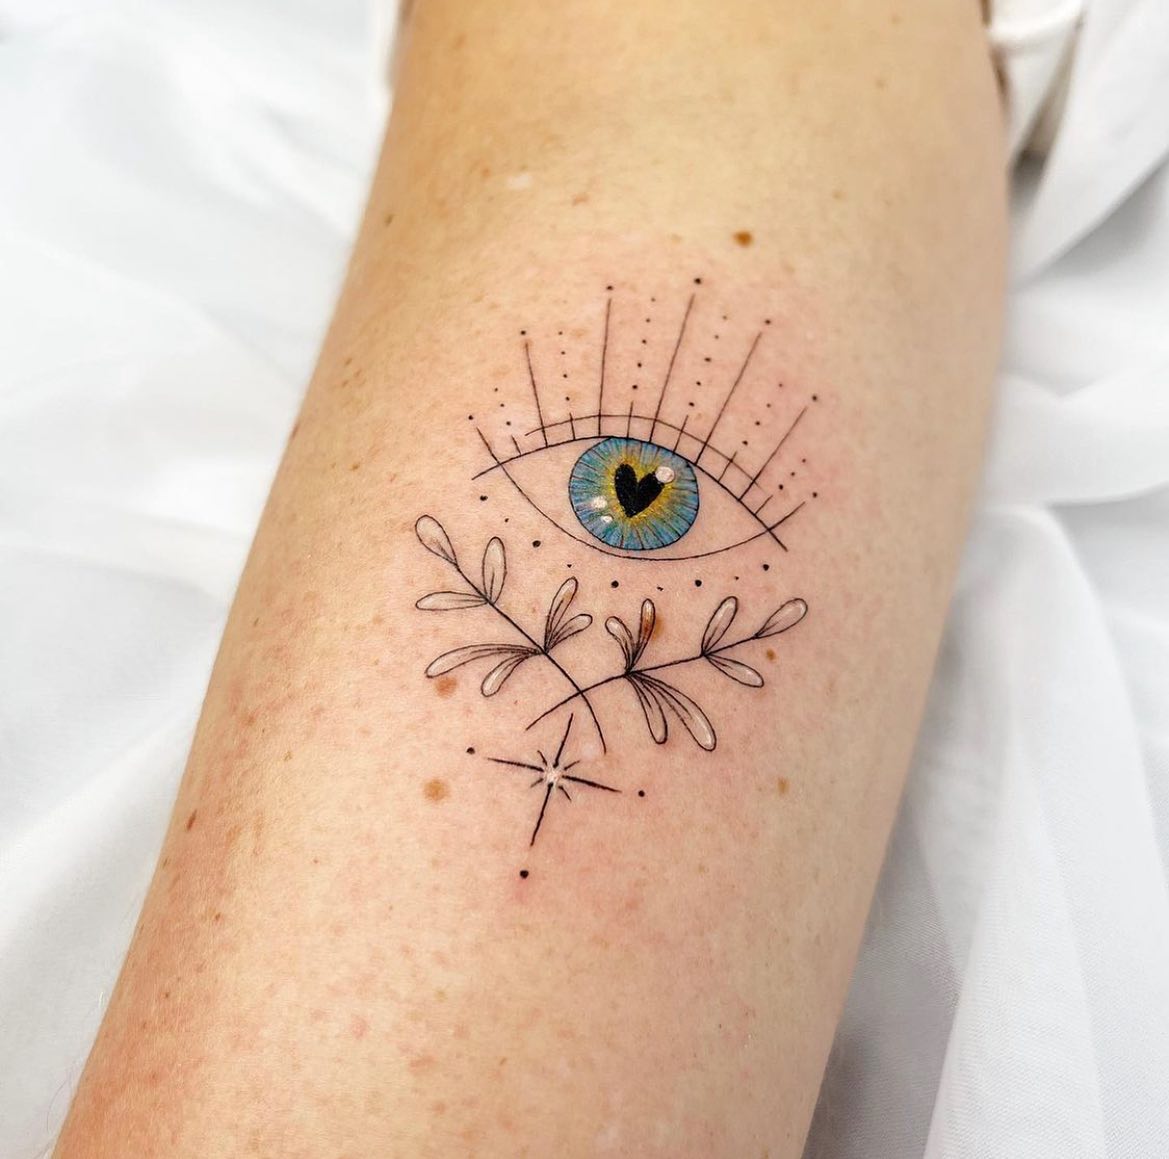 Tattoo uploaded by Shamil Y • Sophisticated and cute evil eye rose for  Giana! #syfitattoos #evileye #floral #smalltattoo #eyes #girly #color  #traditional #cute #colorful #simple #brooklyn #nyc • Tattoodo